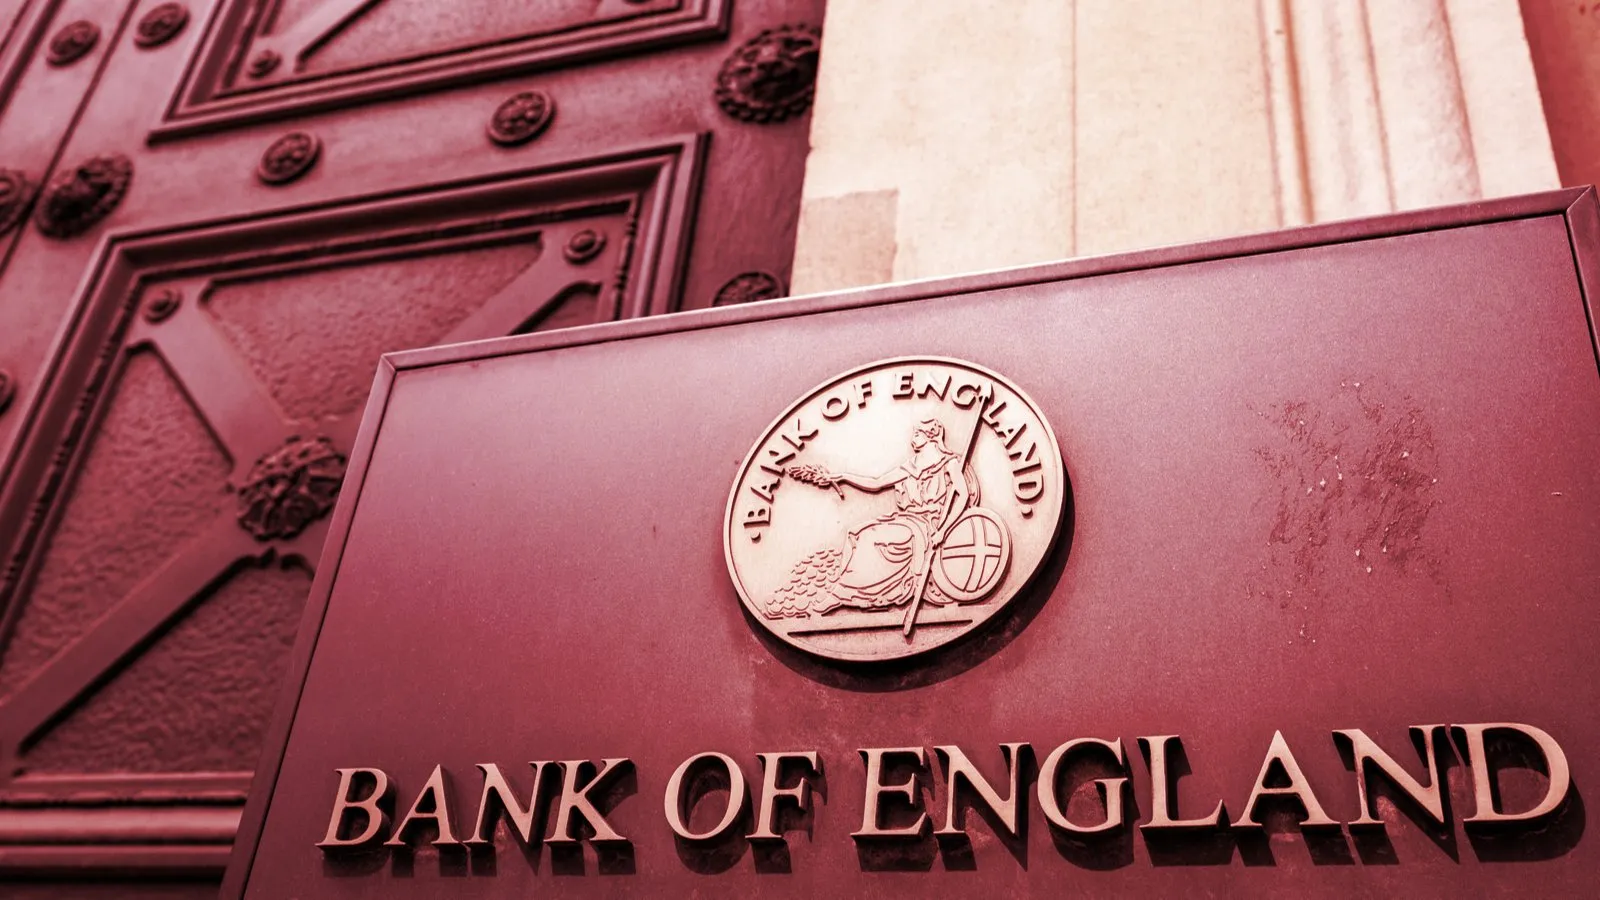 Bank of England is the central bank in the UK. Image: Shutterstock